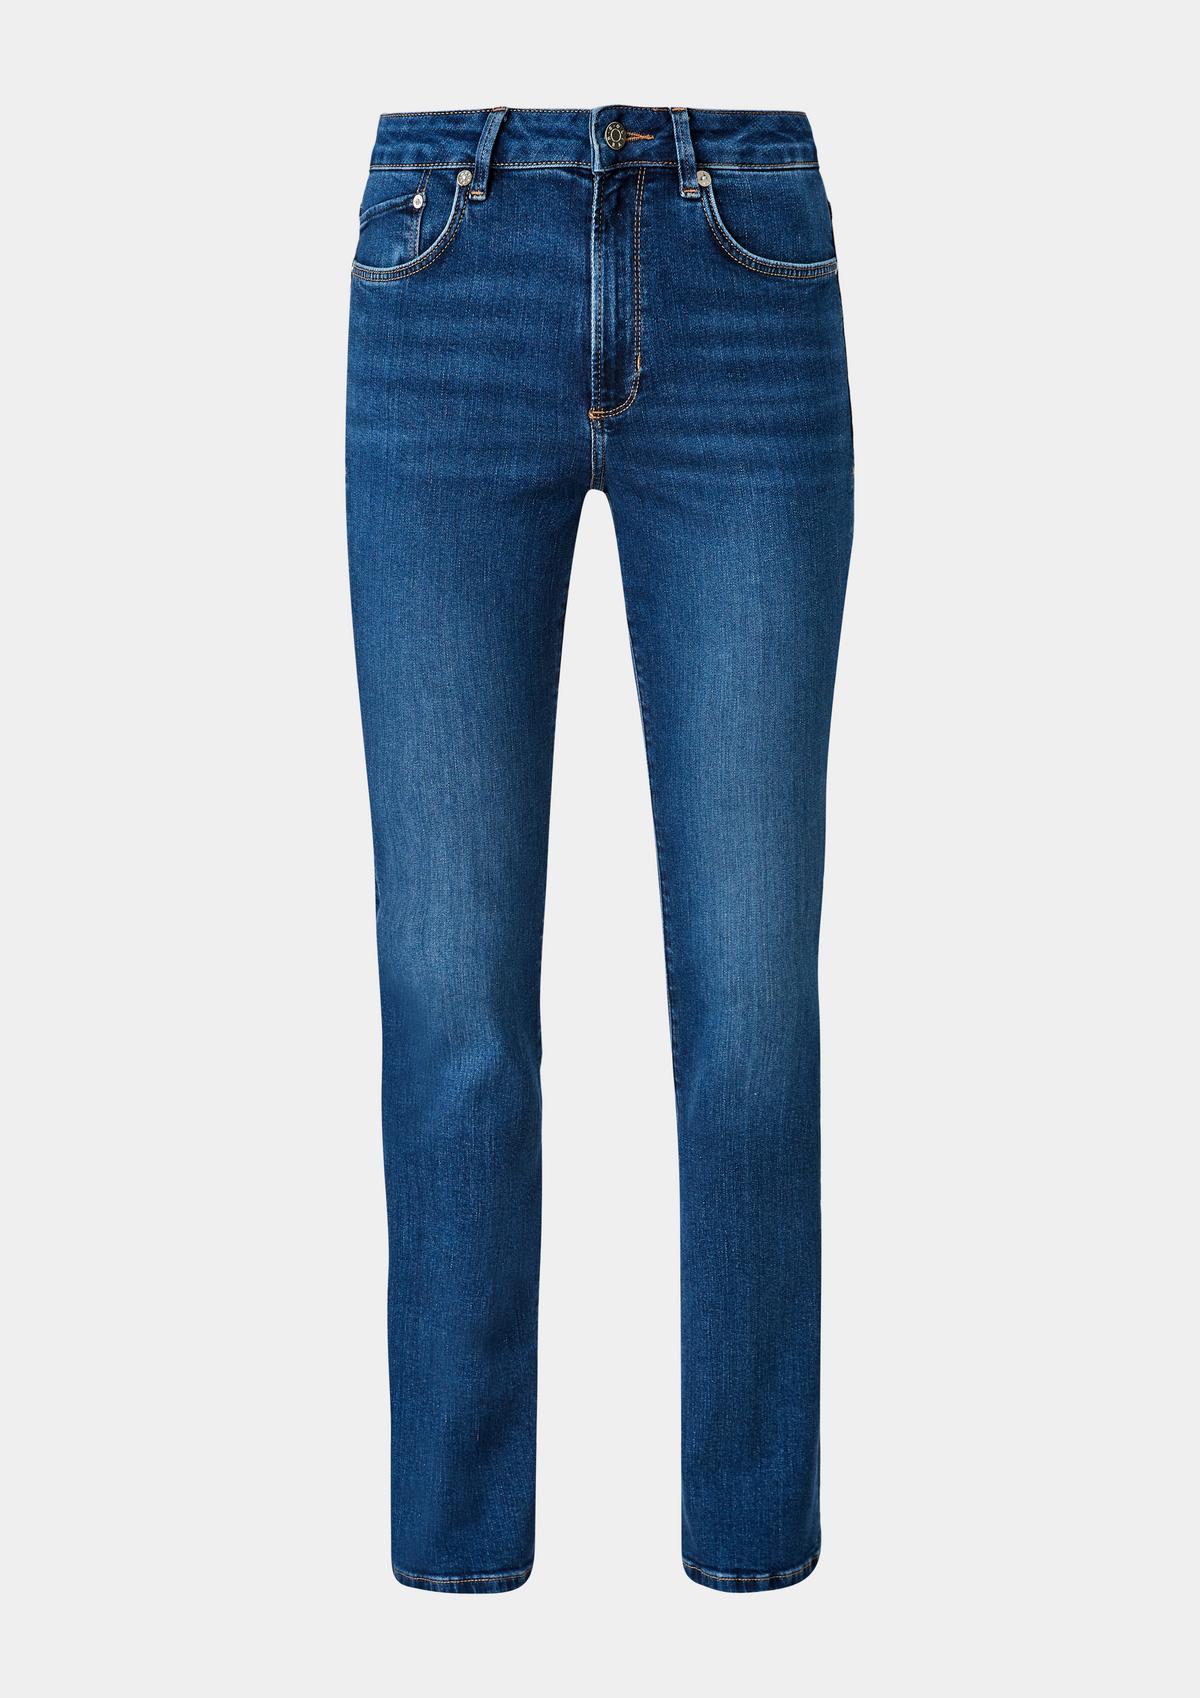 s.Oliver Jeans Beverly / Slim Fit / Mid Rise / Bootcut Leg 